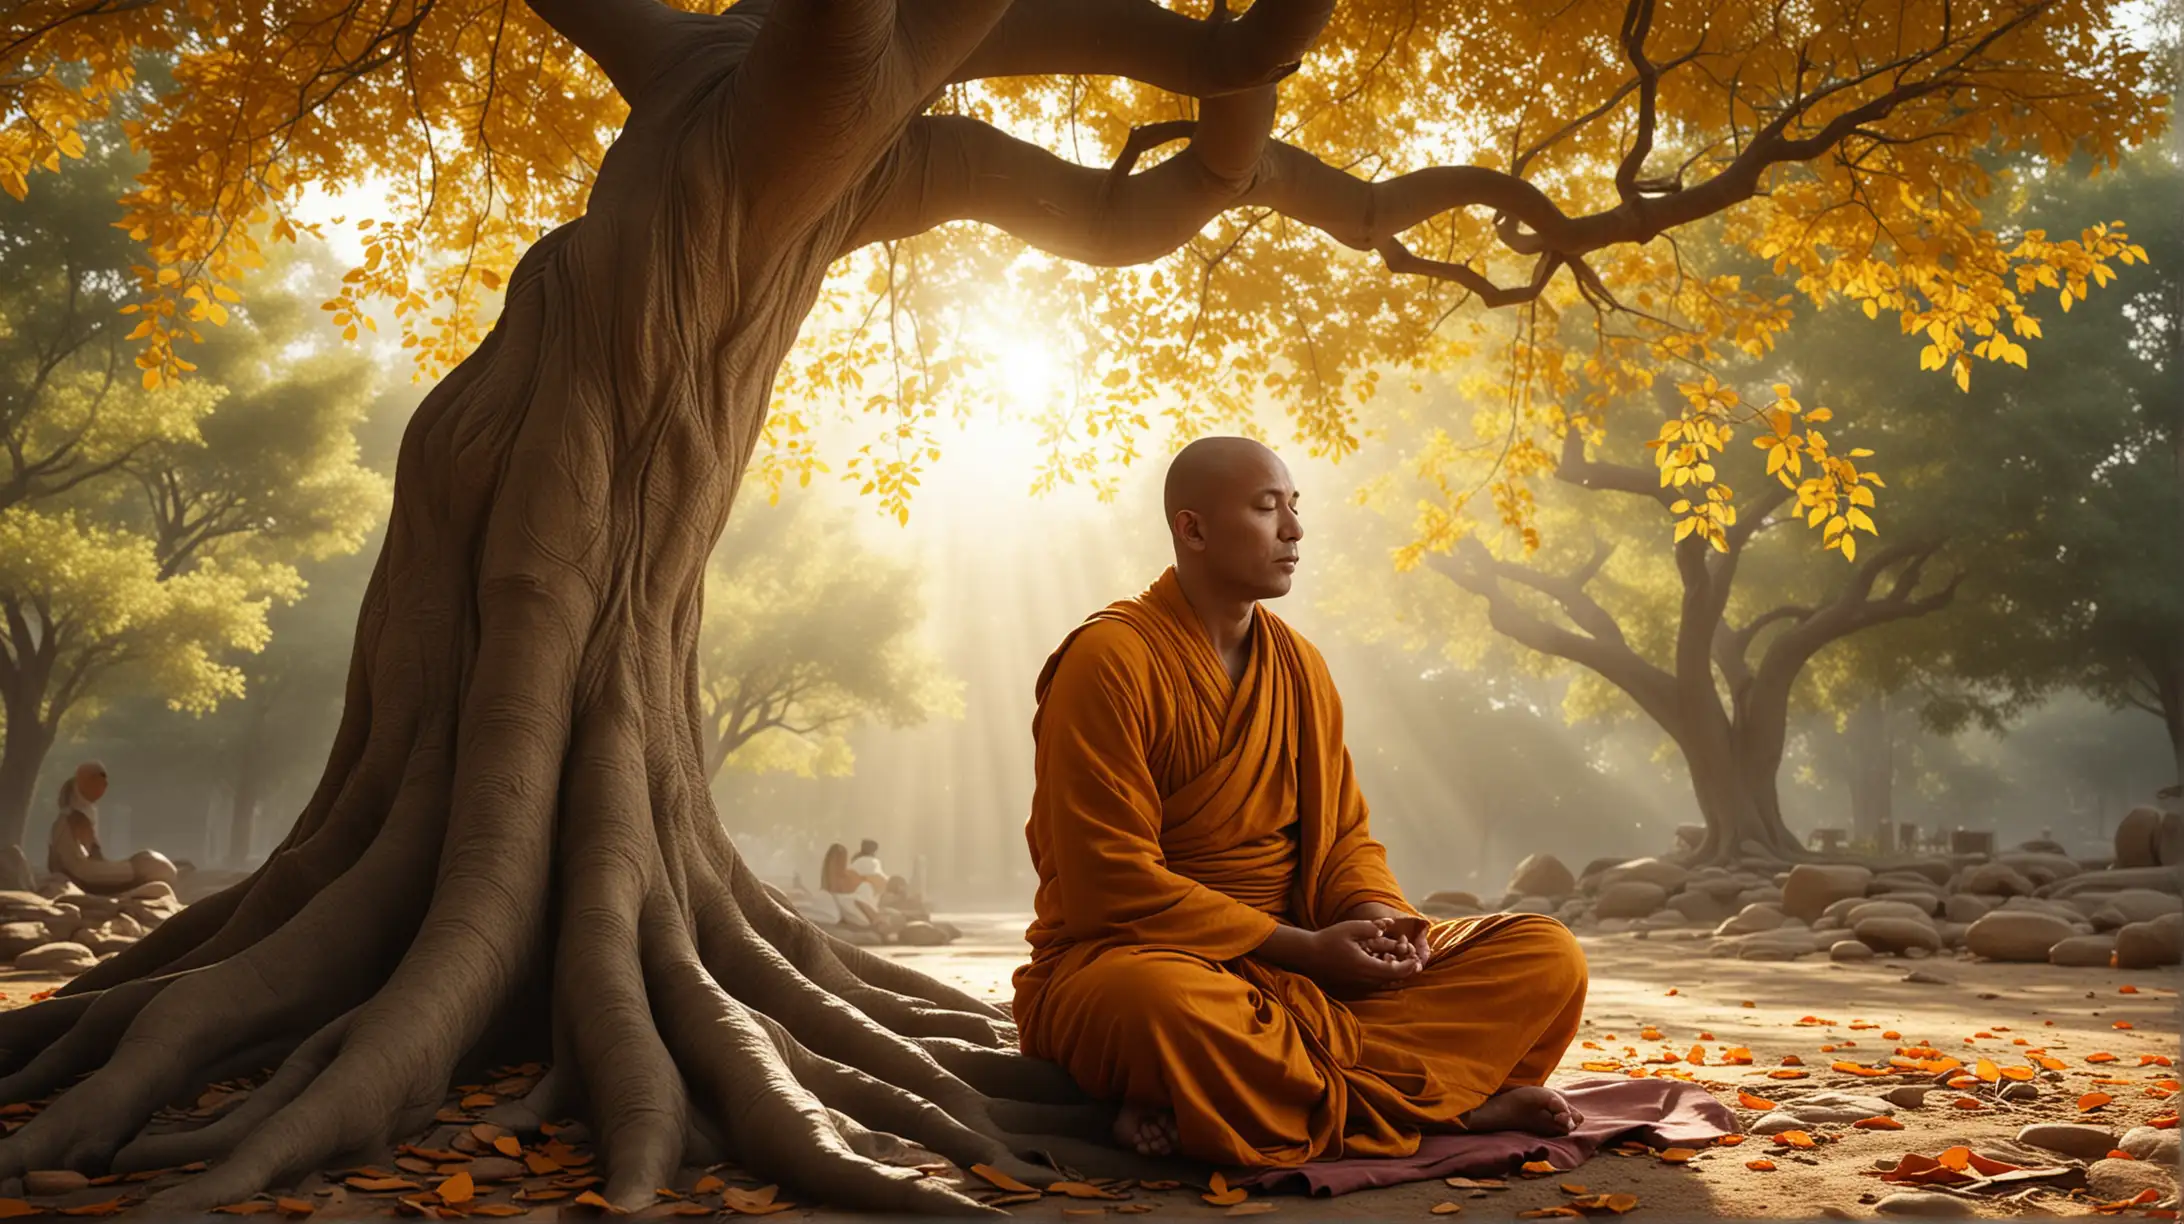 A serene Buddhist monk meditating under a Bodhi tree, surrounded by tranquil nature. His saffron robes flutter gently in the breeze as he sits in deep contemplation. The scene captures the essence of peace and spiritual enlightenment, with the soft glow of sunlight filtering through the leaves, creating a serene and harmonious atmosphere. Highly realistic. Create mildly dark and mildly colourful atmospheric images inspired by noir video games. Use with Vision XL for best results.